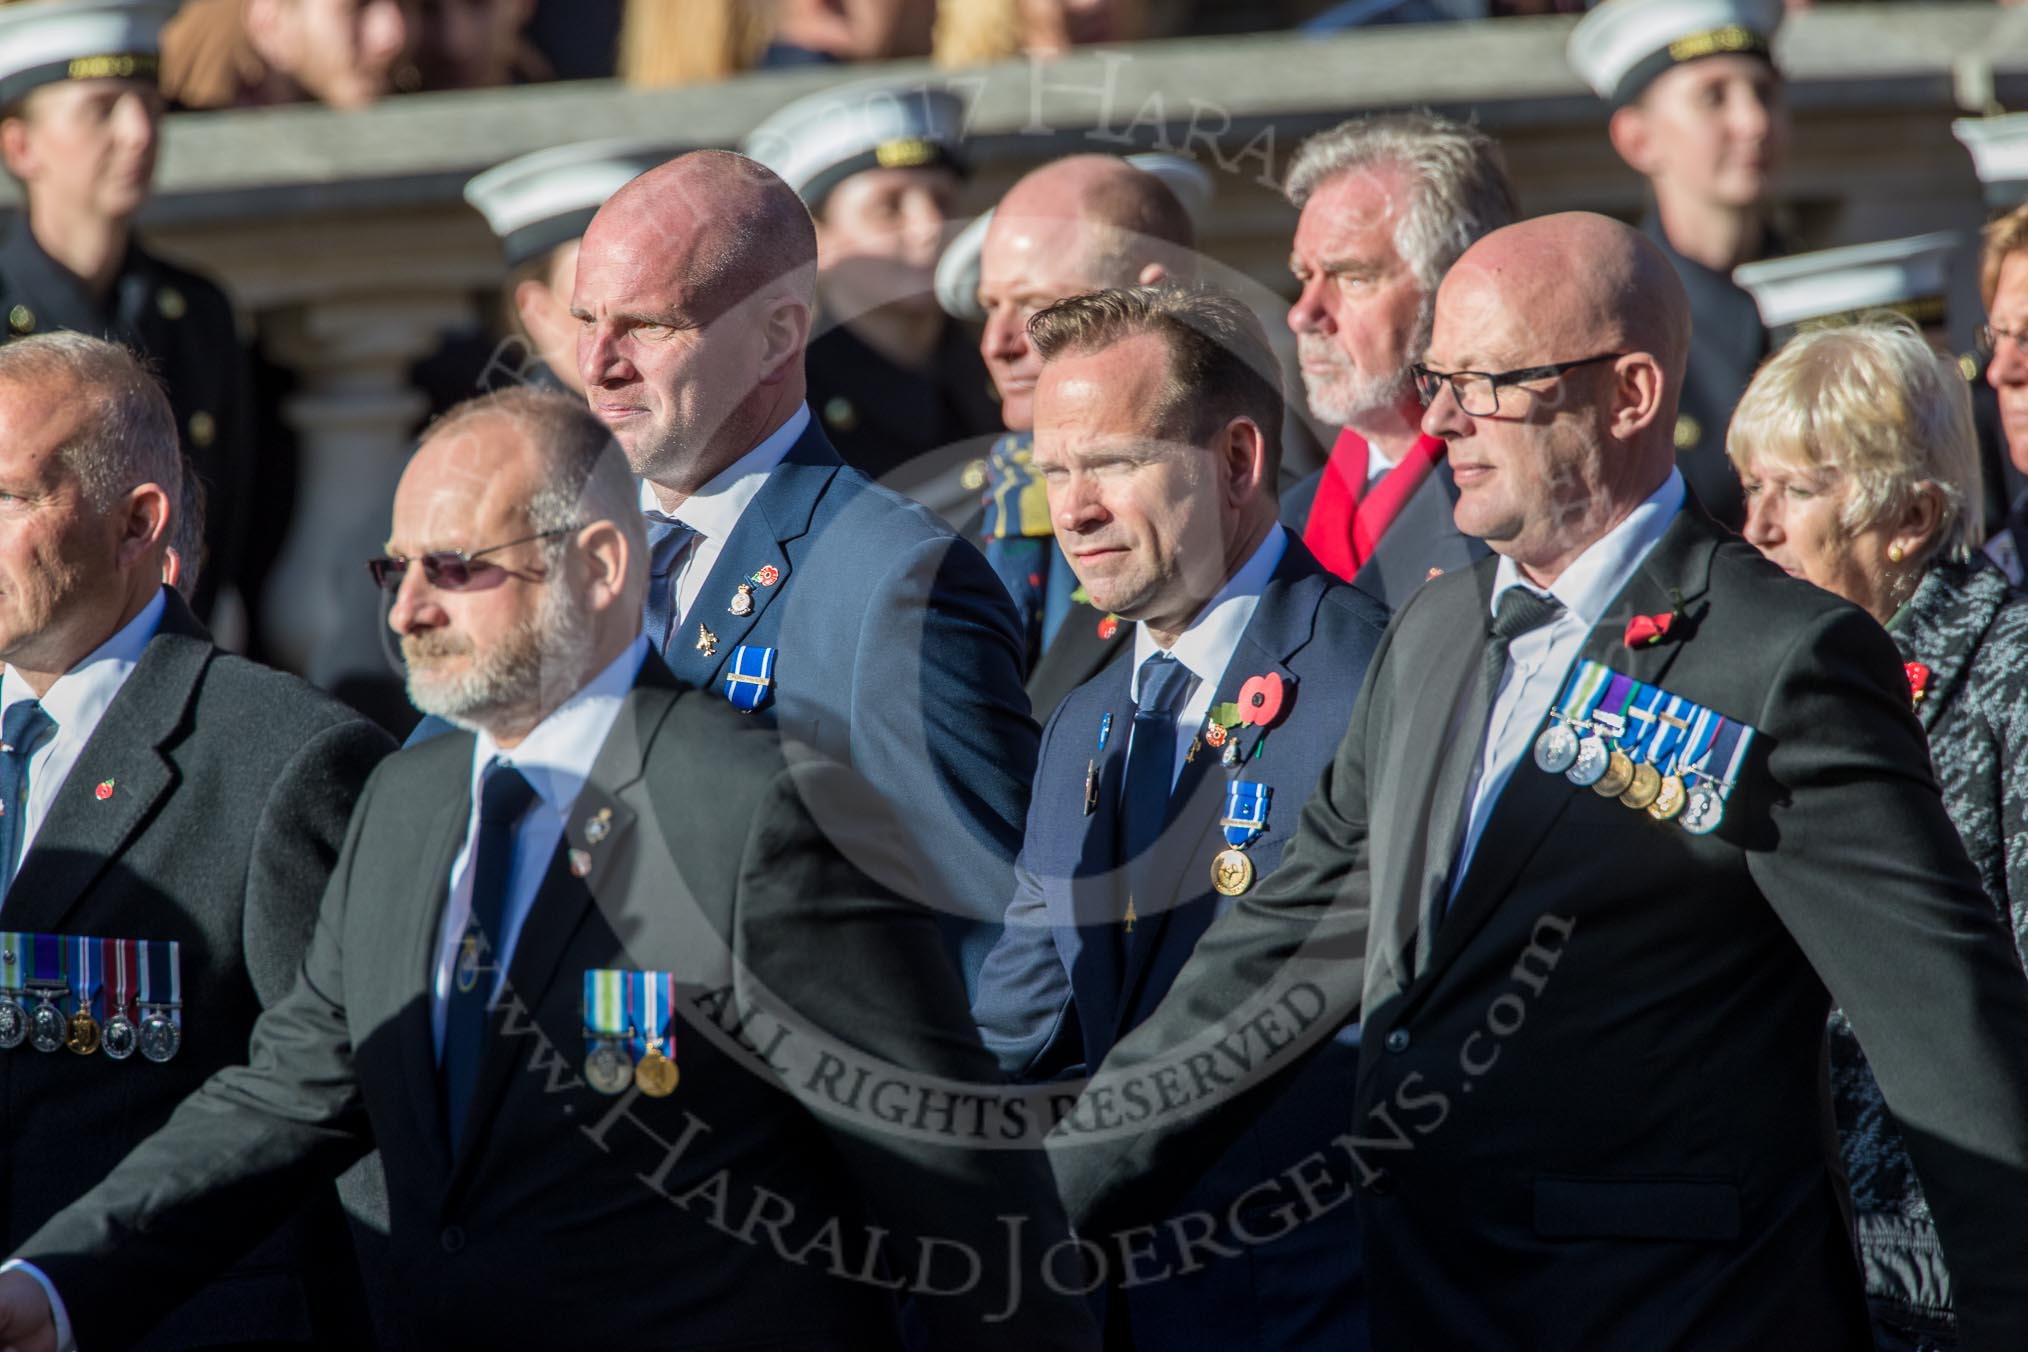 Sea Harrier (Group E15, 30 members) during the Royal British Legion March Past on Remembrance Sunday at the Cenotaph, Whitehall, Westminster, London, 11 November 2018, 11:43.